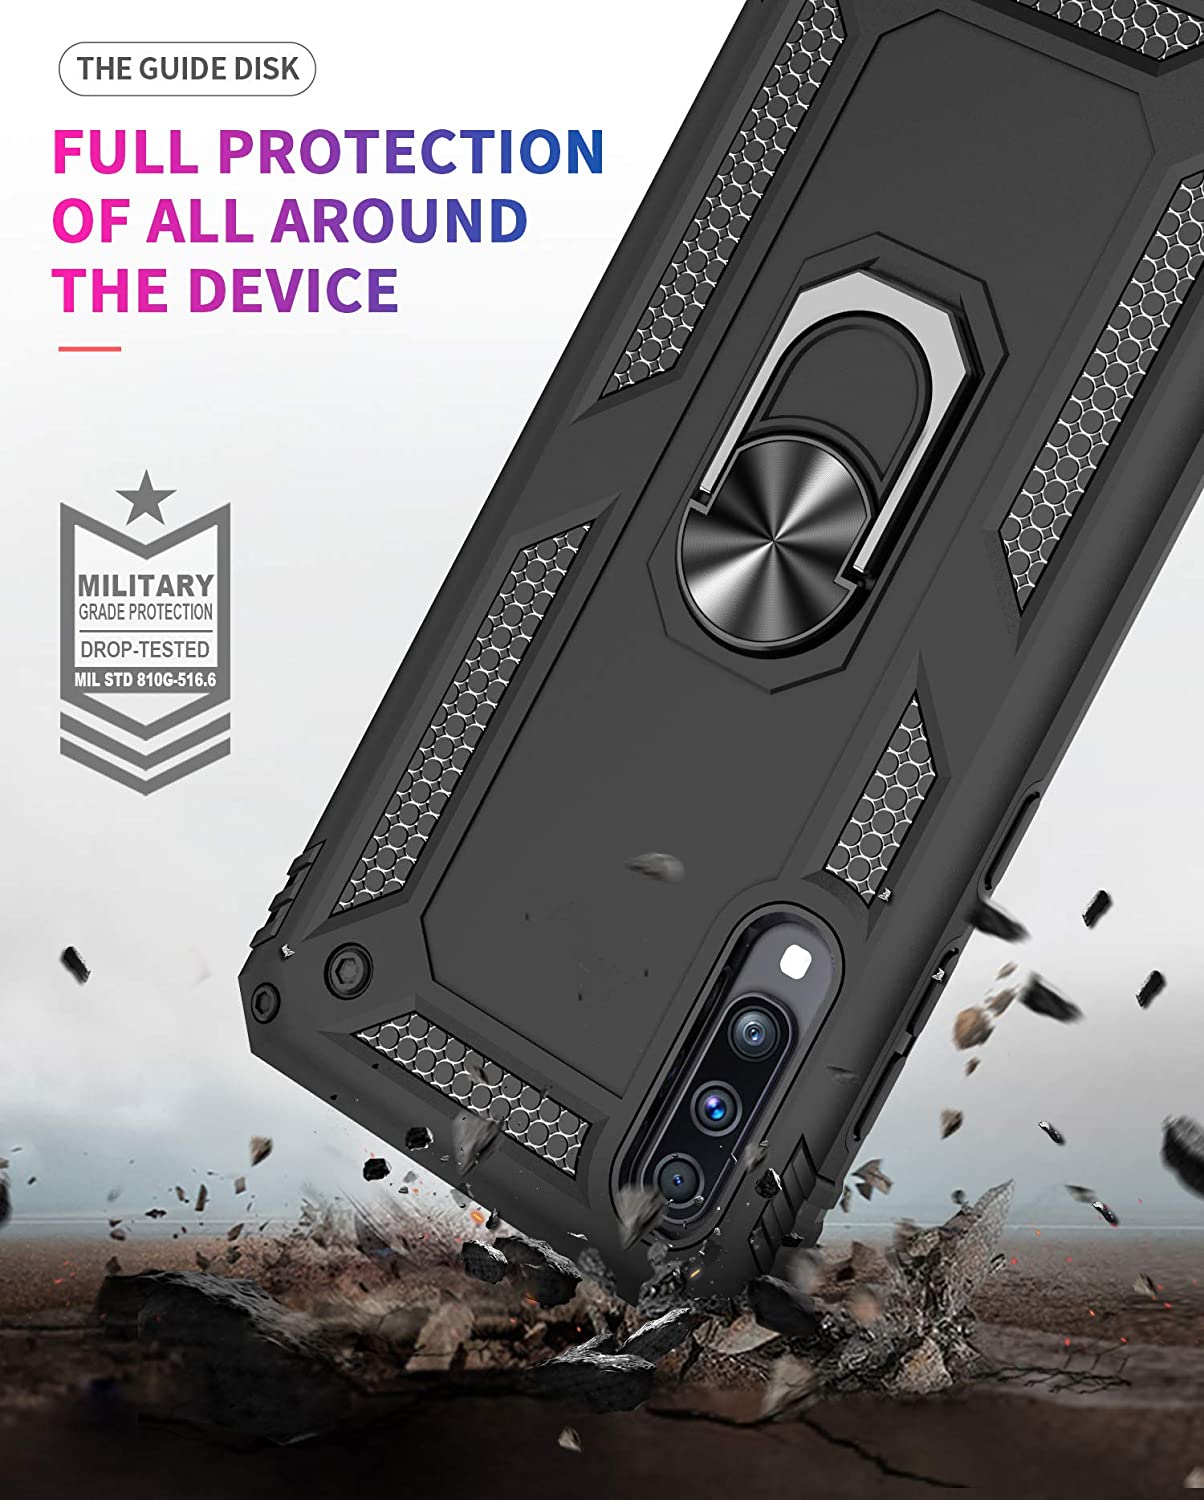 Samsung Galaxy A10 Case Shockproof Heavy Duty Ring Rugged Armor Case Cover